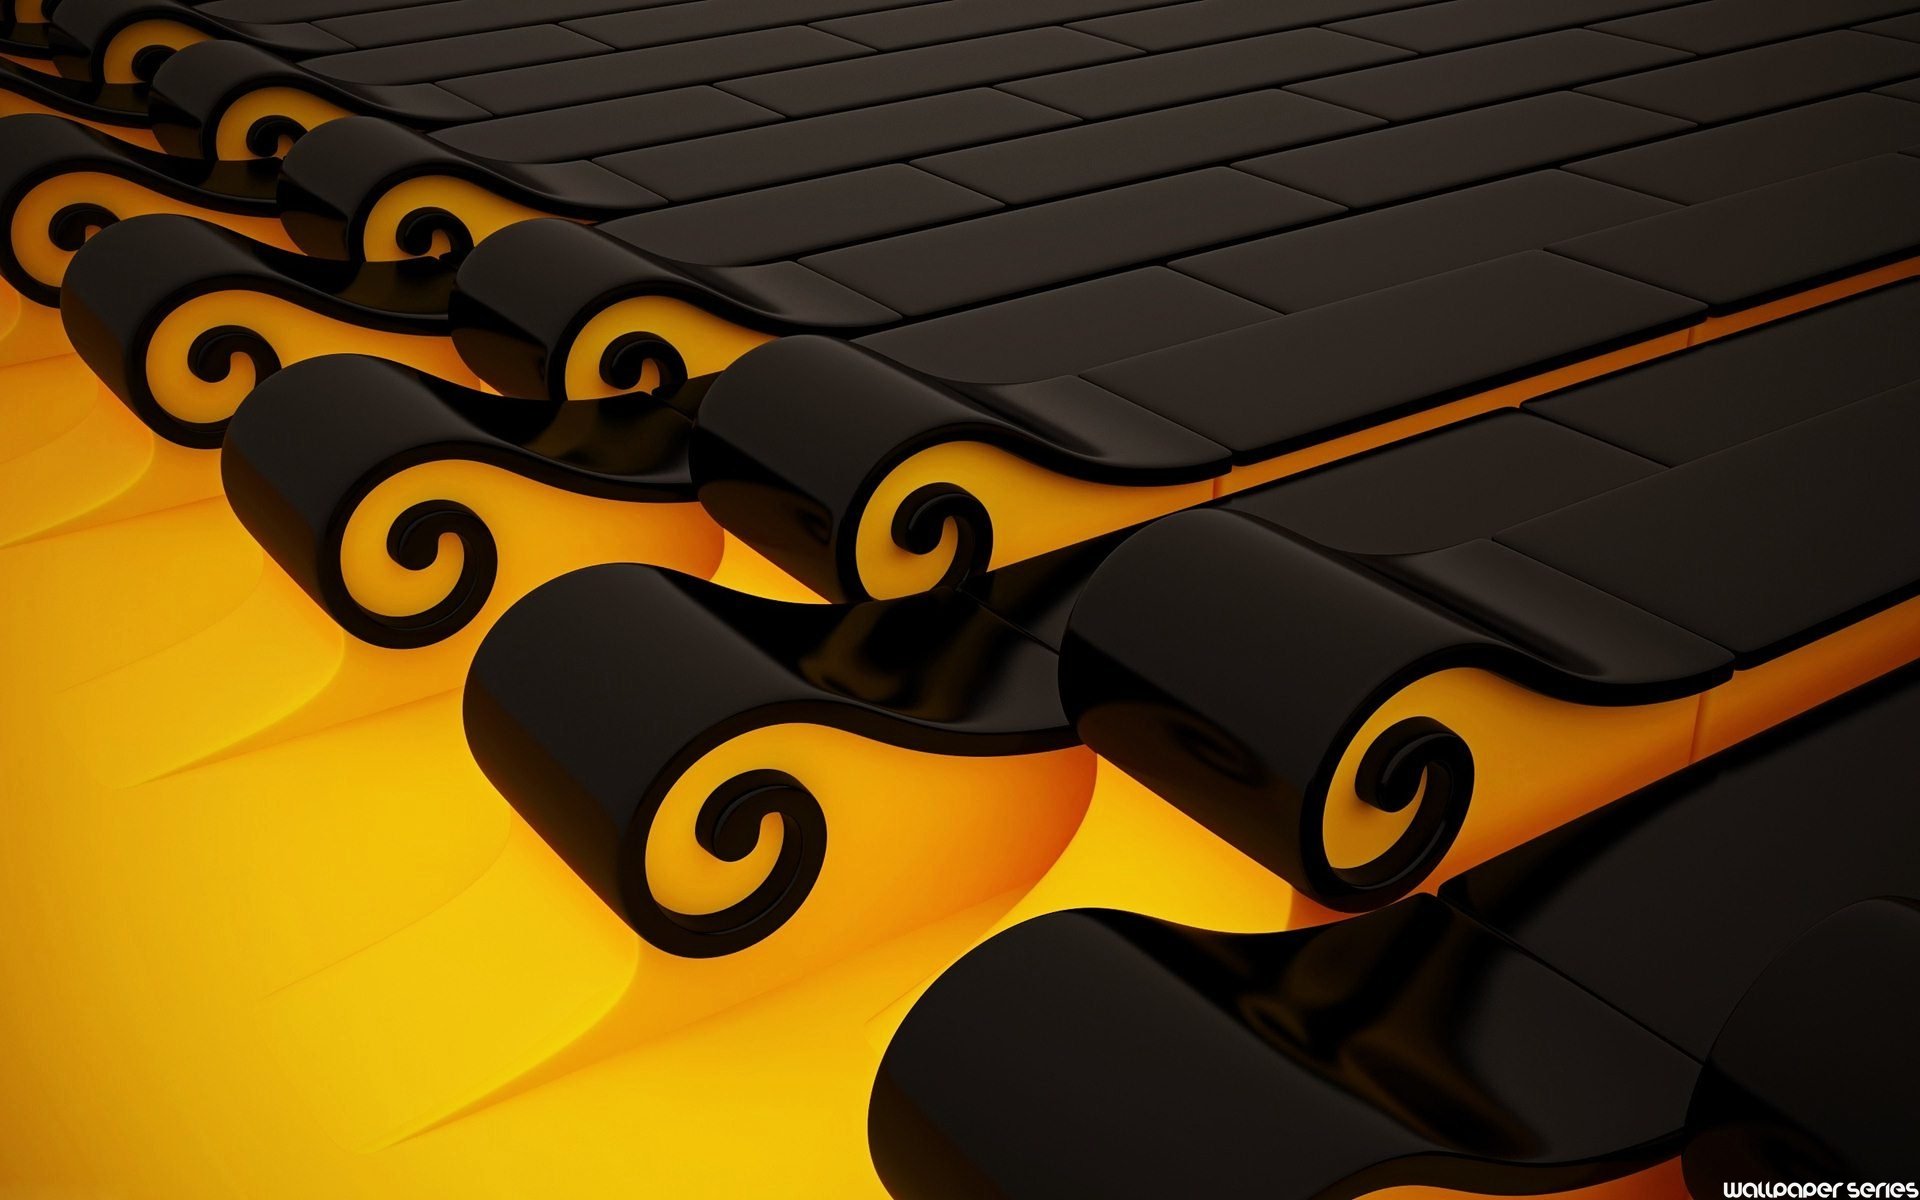  Black  And Yellow  Wallpapers  26 Cool Wallpaper  